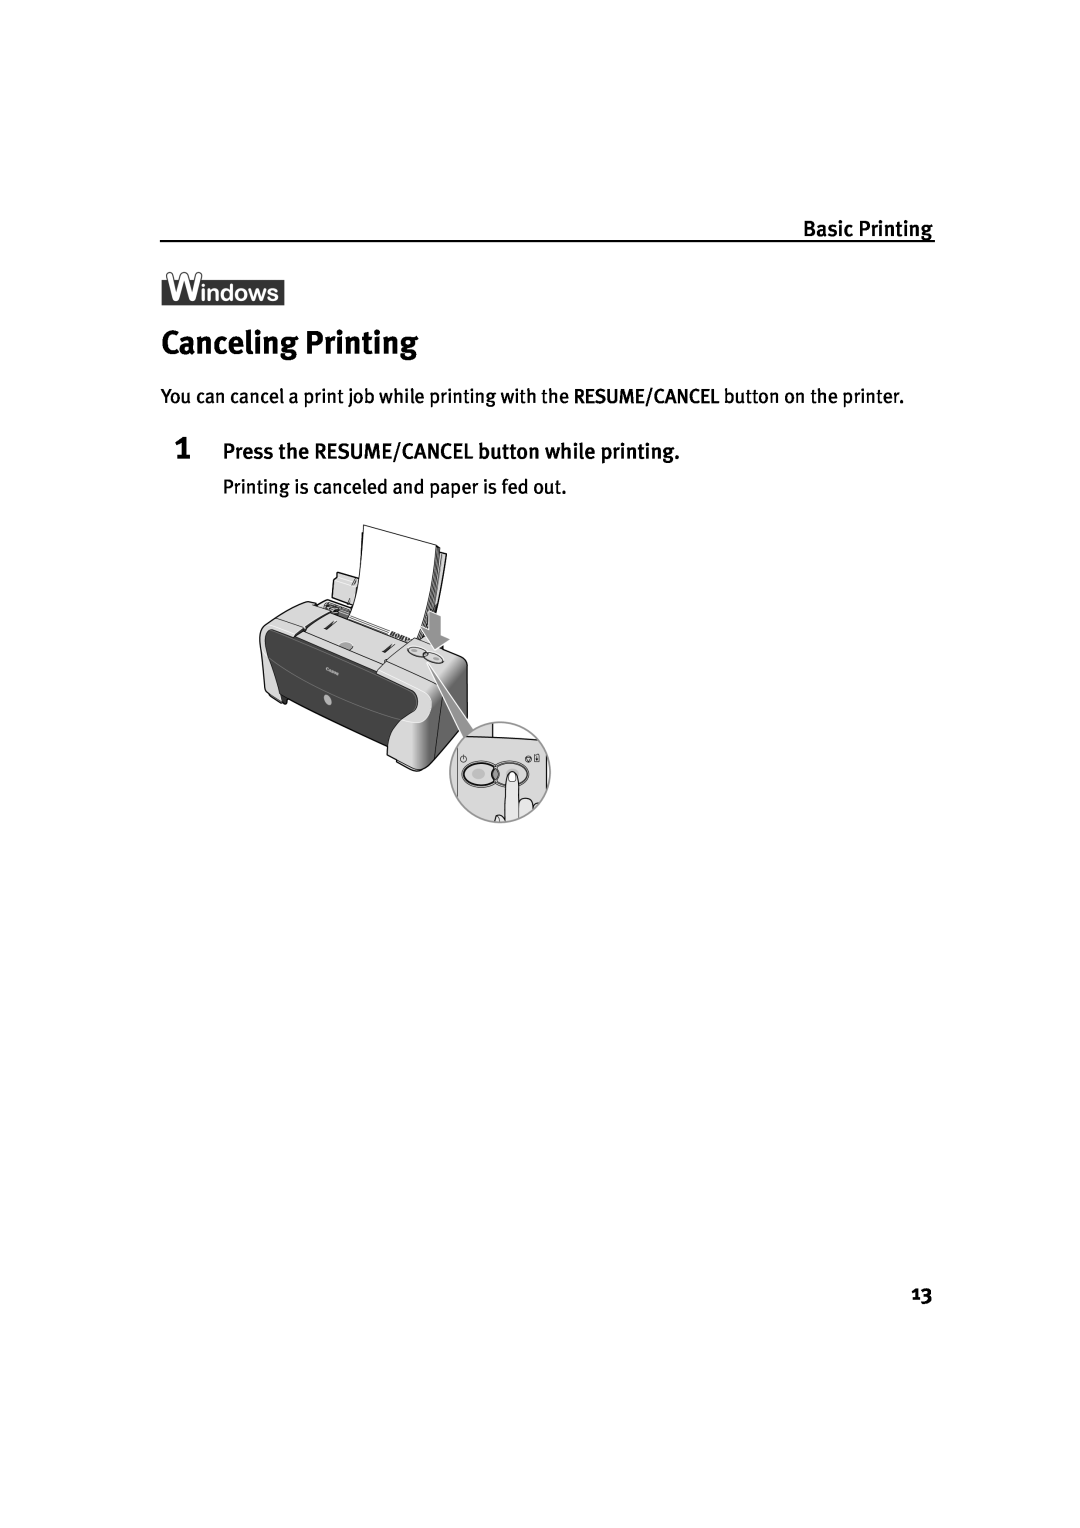 Canon IP1500 quick start Canceling Printing, Basic Printing, Press the RESUME/CANCEL button while printing 